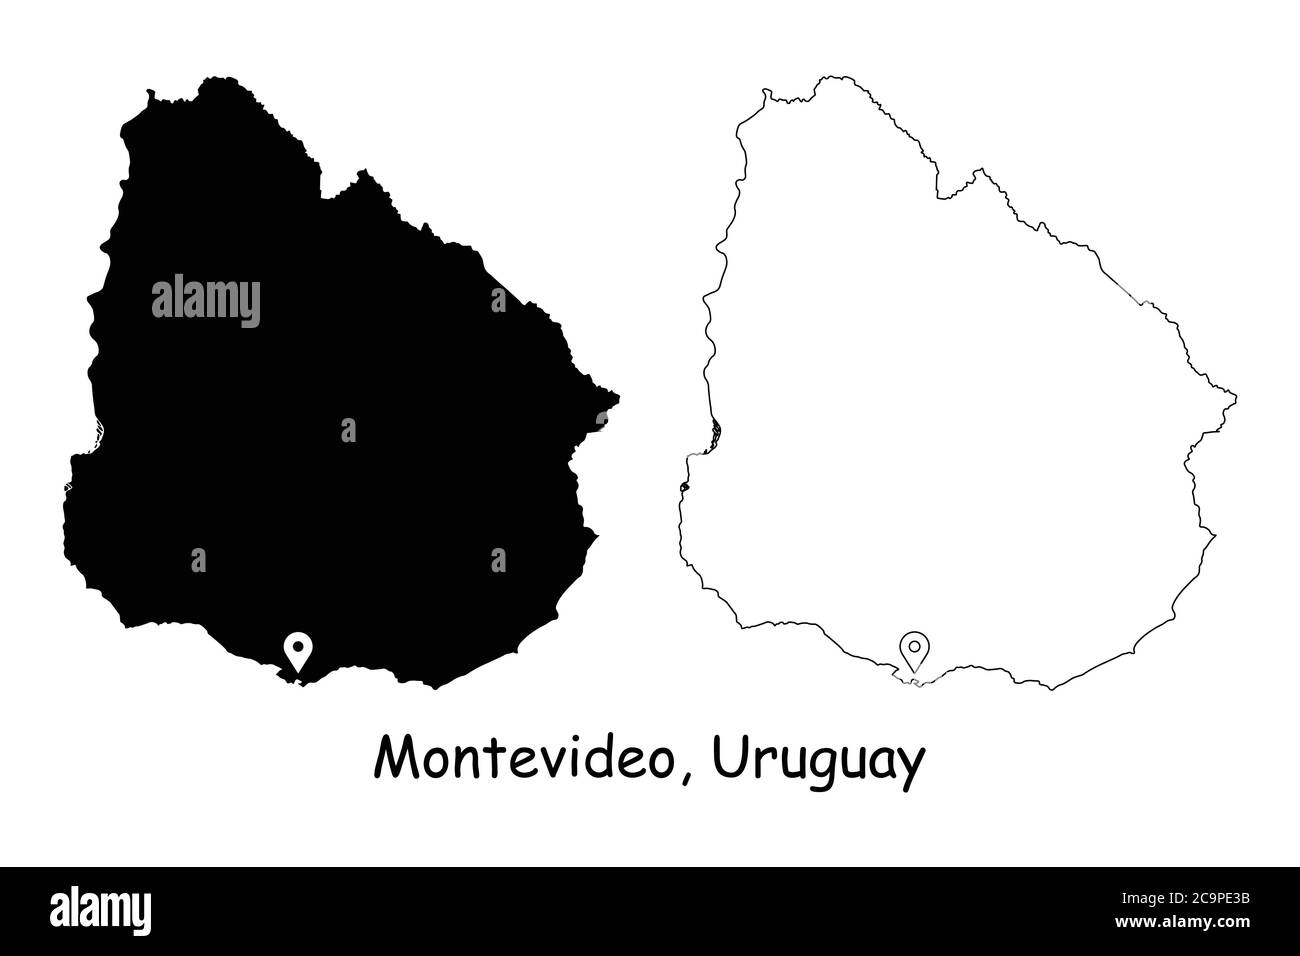 Montevideo, Uruguay. Detailed Country Map with Location Pin on Capital City. Black silhouette and outline maps isolated on white background. EPS Vecto Stock Vector